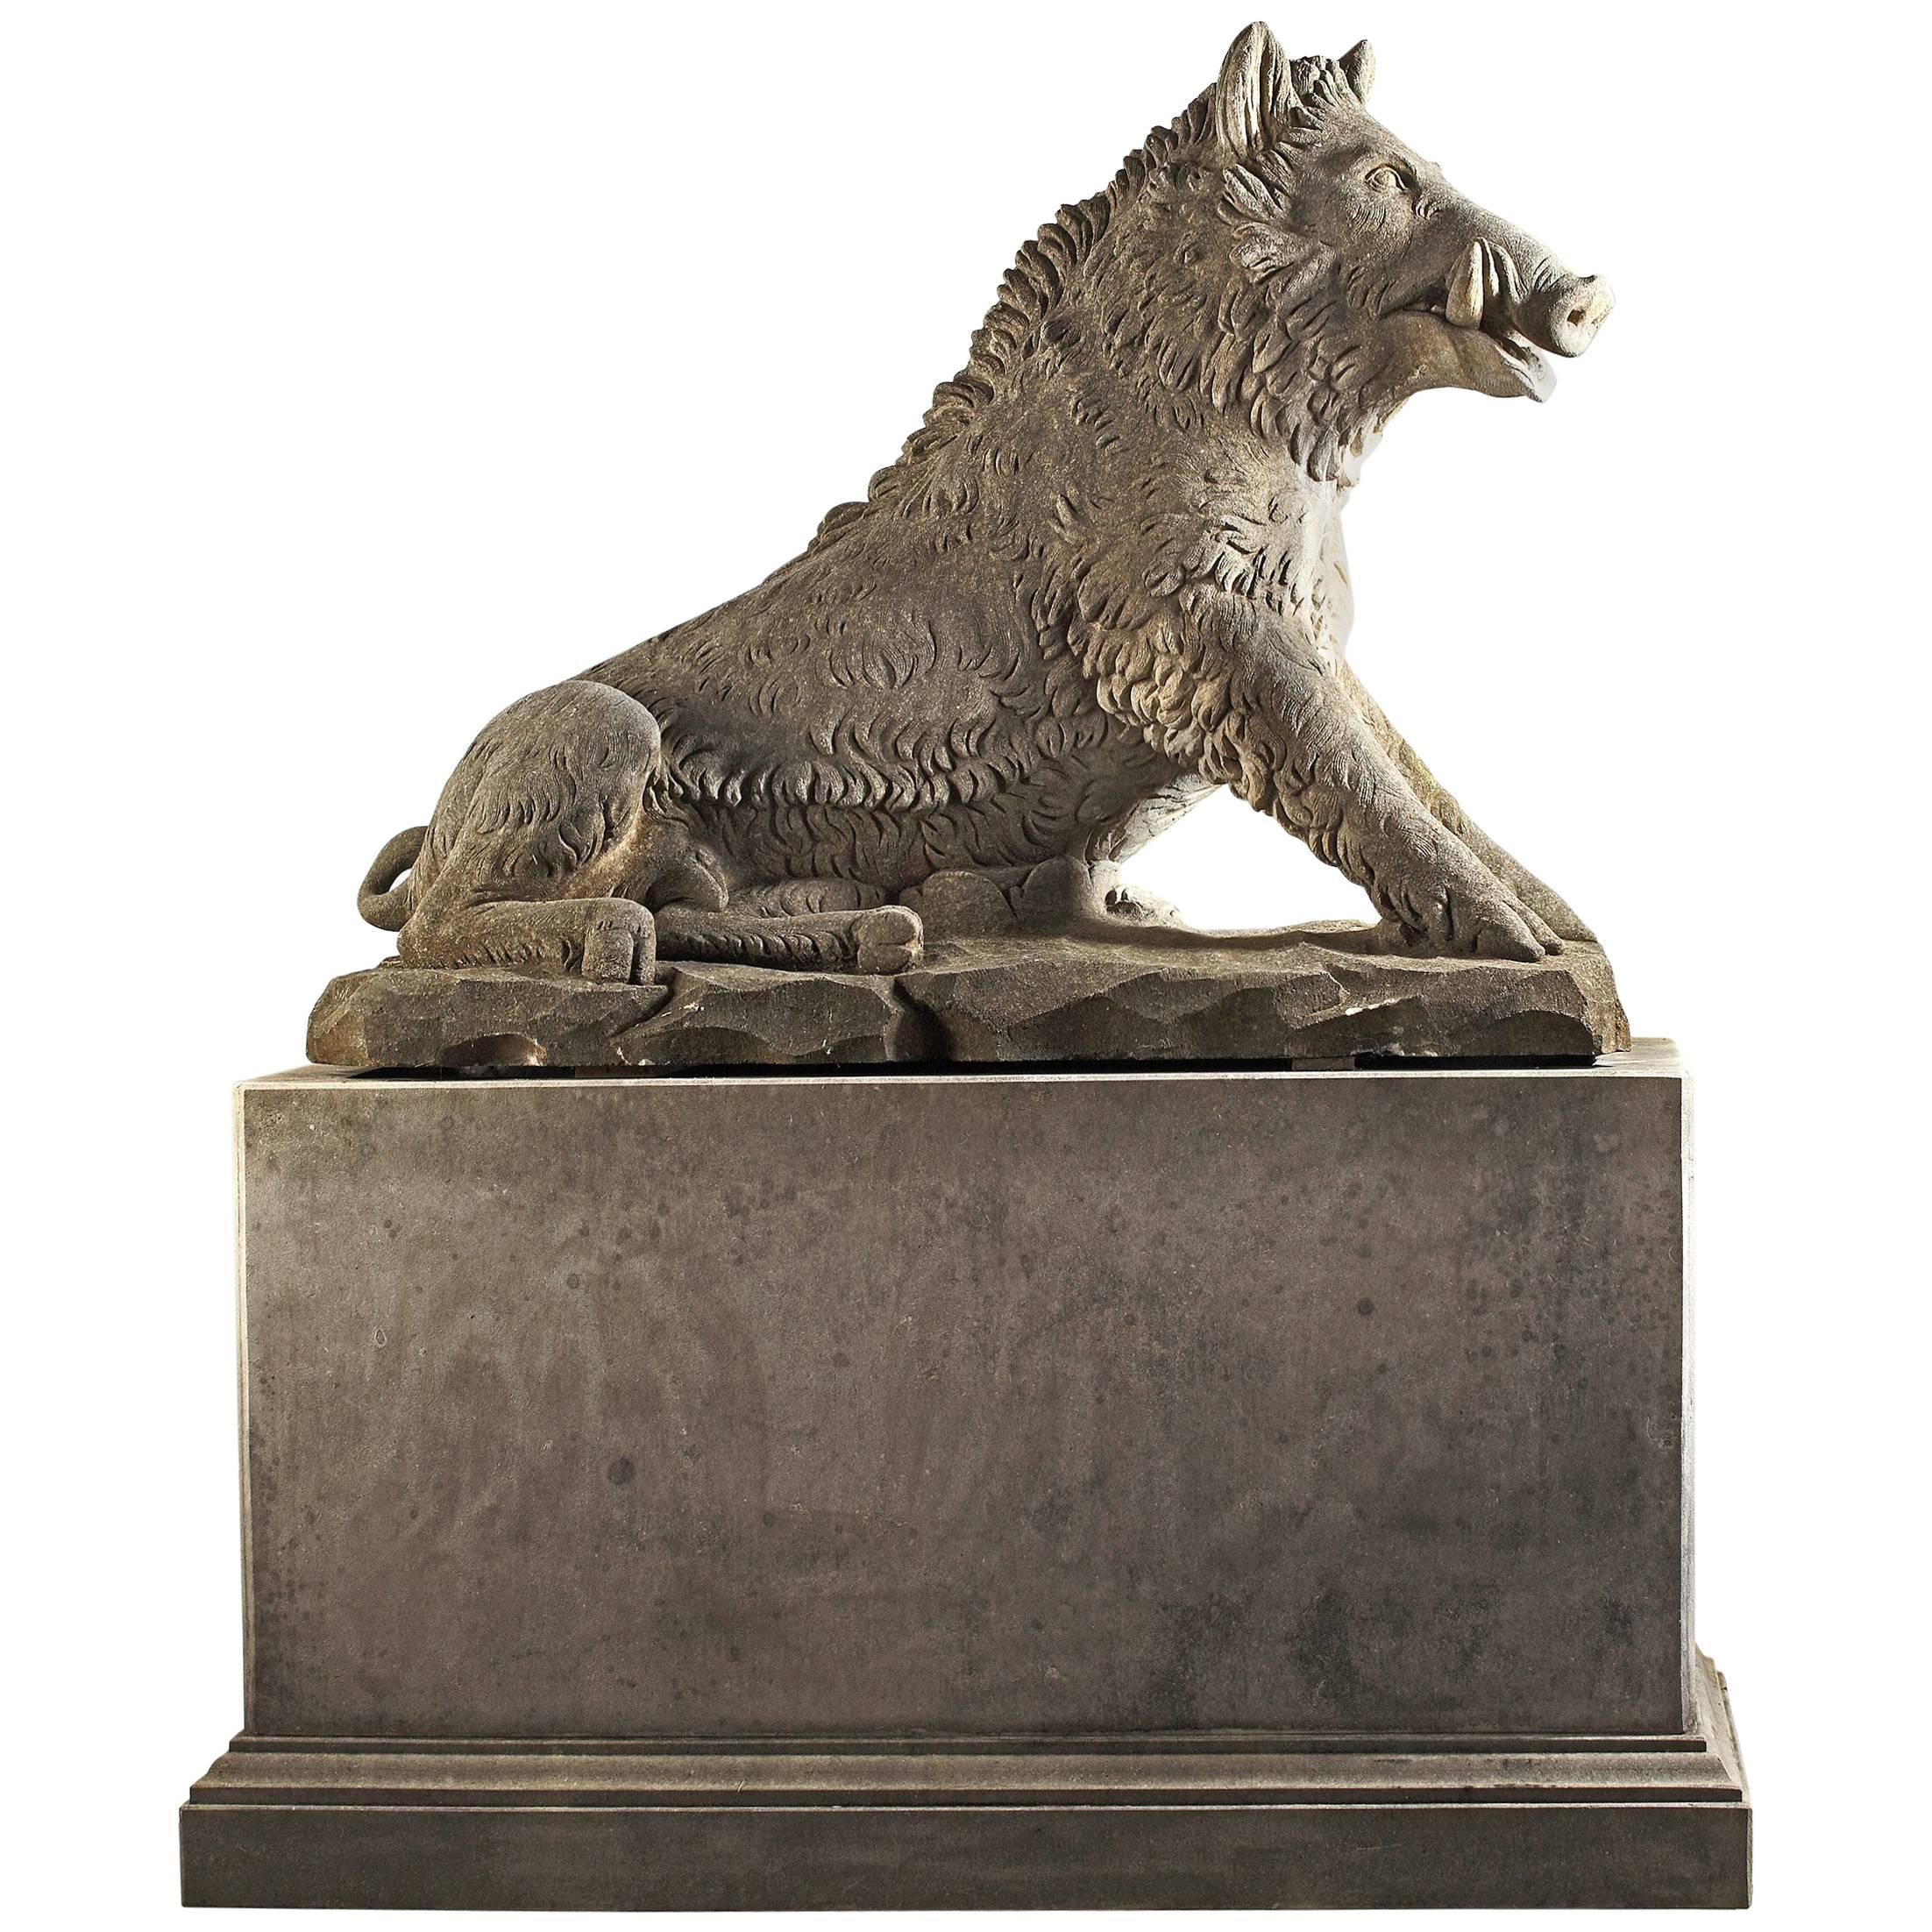 Sculpted Limestone Model of the Calydonian Wild Boar, After the Antique